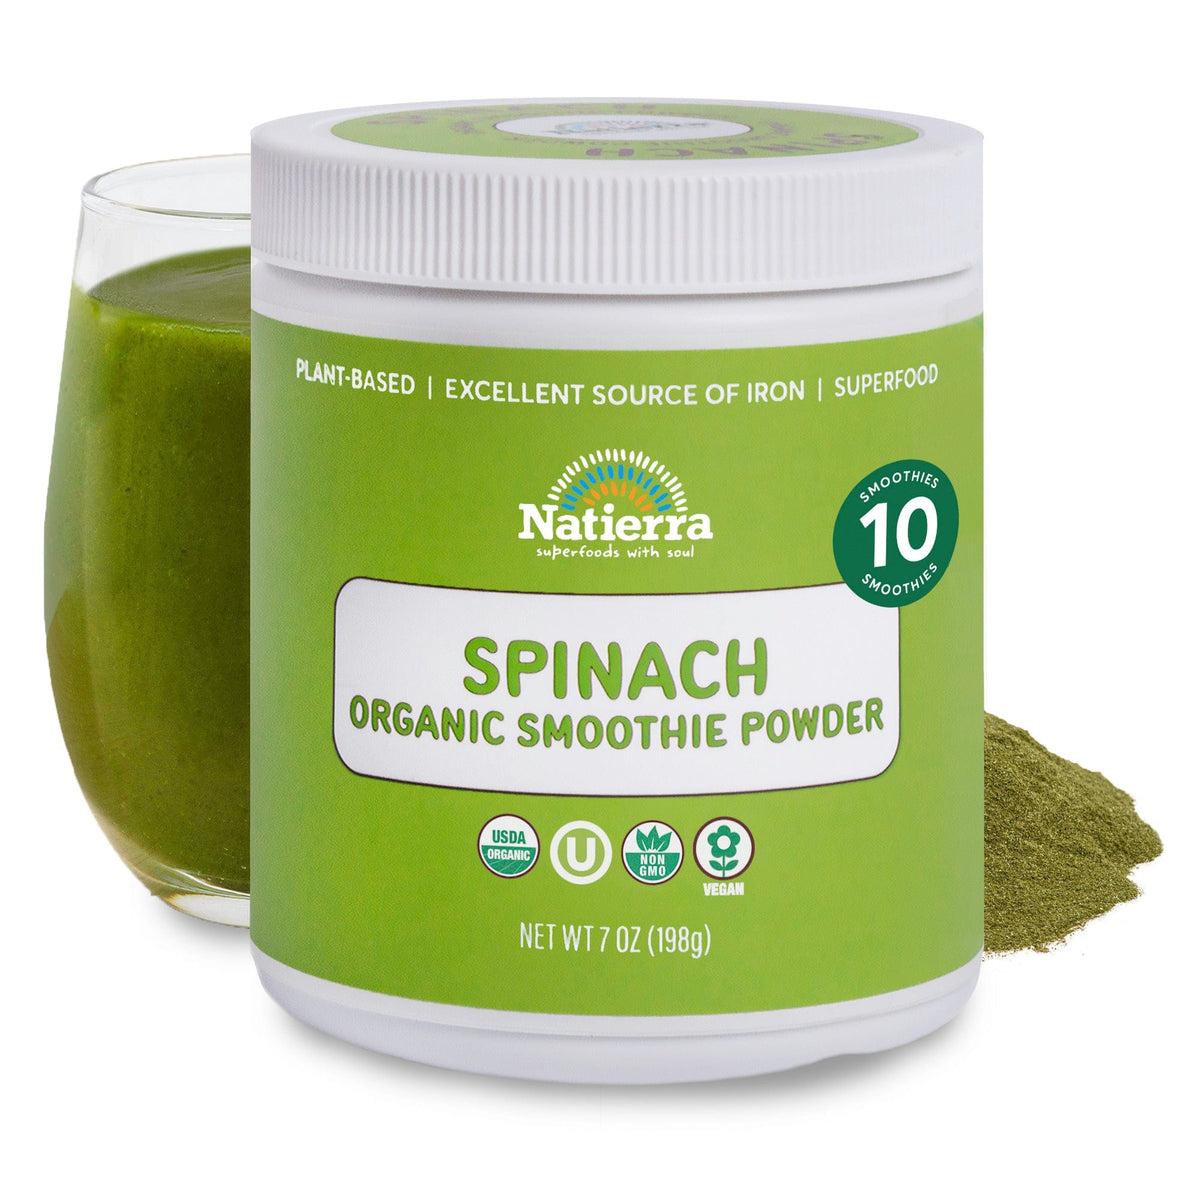 Natierra Spinach Organic Smoothie jar with glass and powder in the background